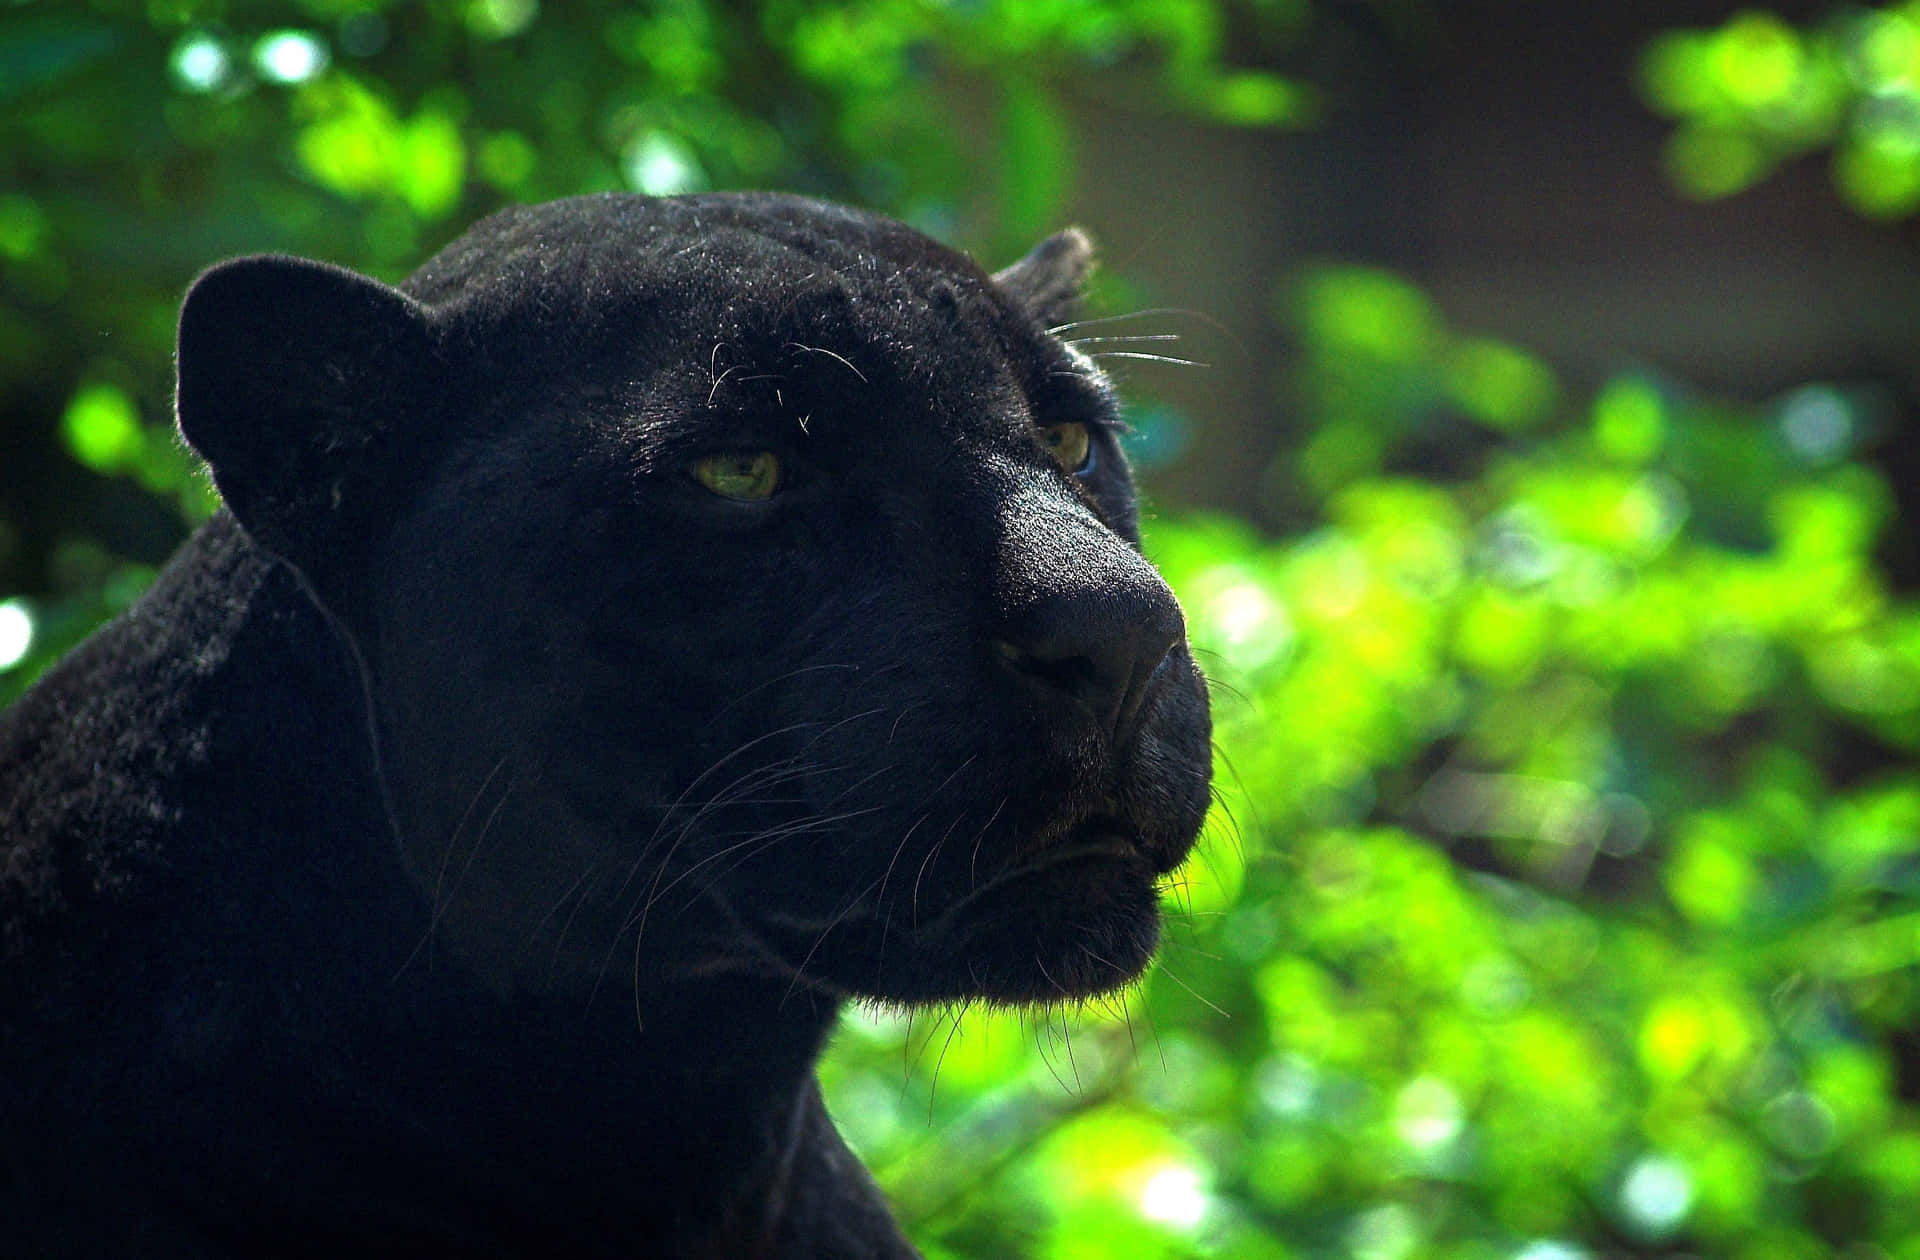 Don't mess with this majestic black panther! Wallpaper